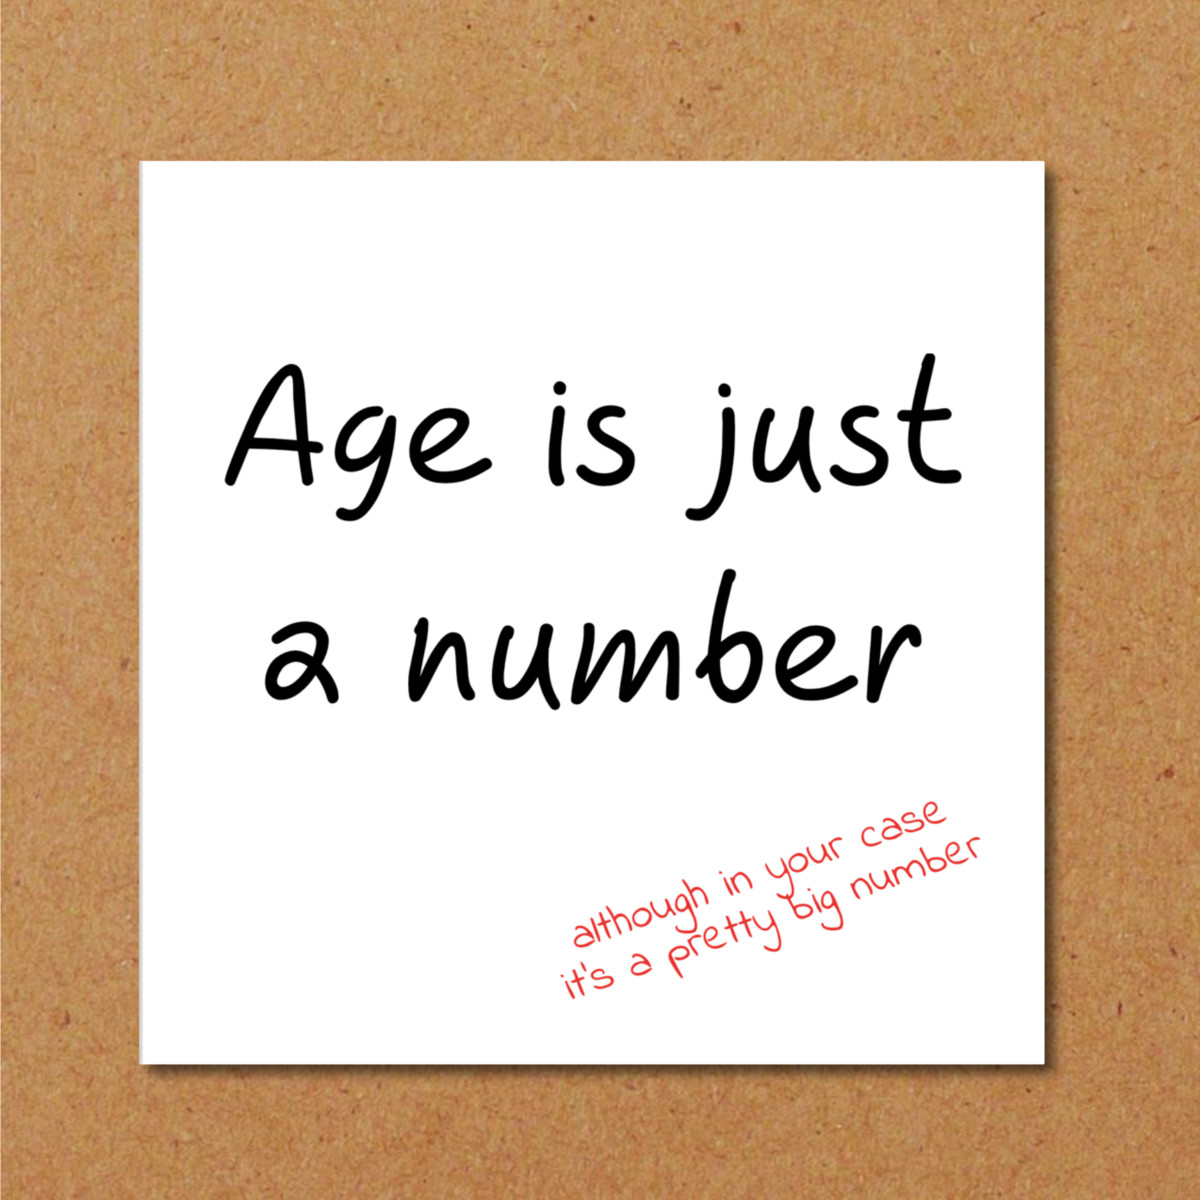 Funny Birthday Cards For Grandma
 Funny Birthday Card ideal 40th 50th or 60th Birthday for